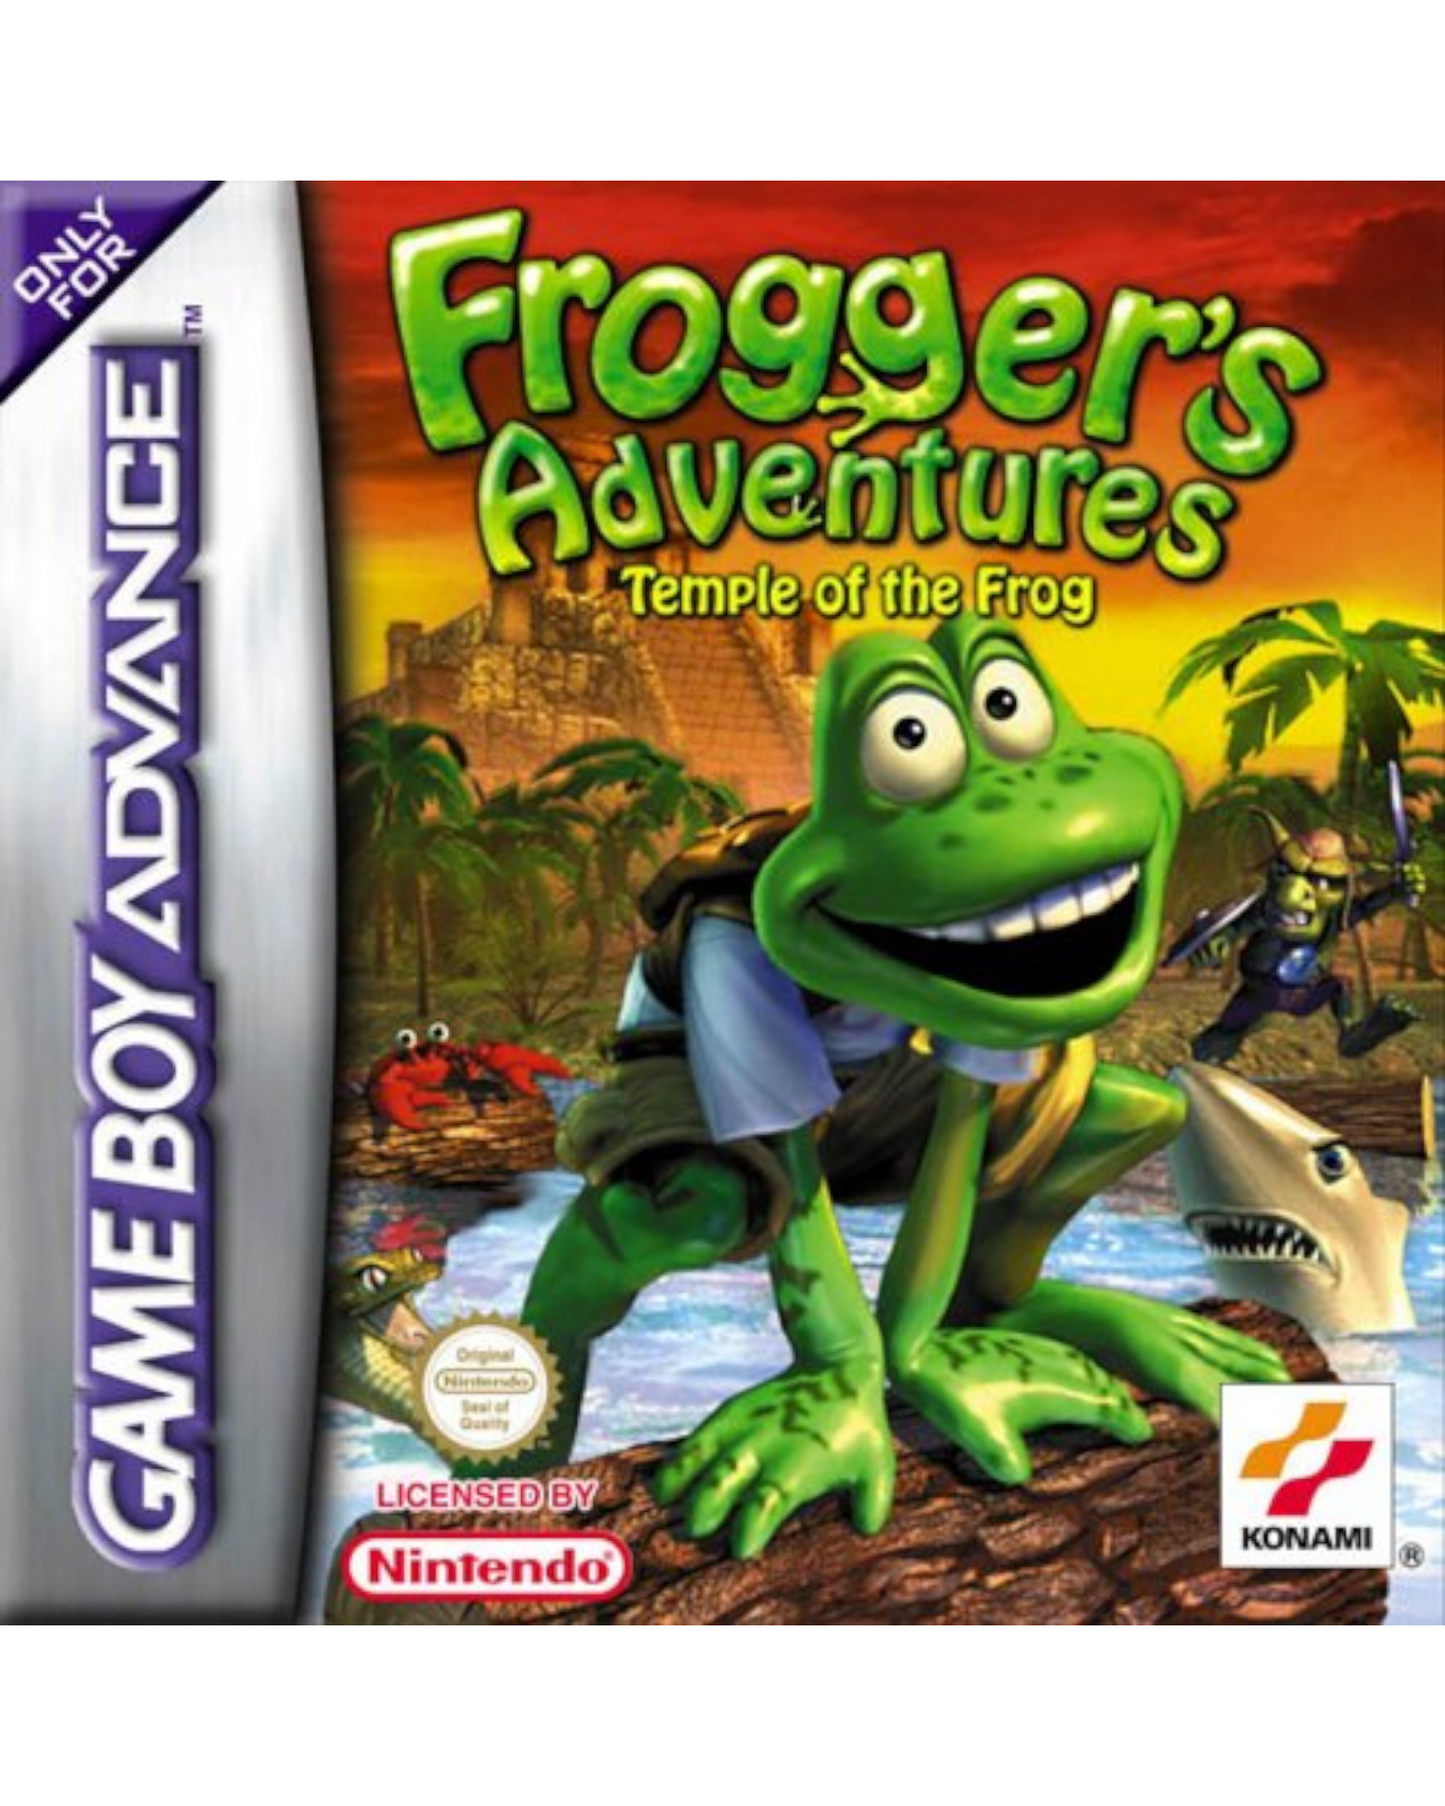 Froggers's Adventures: Temple of the Frog